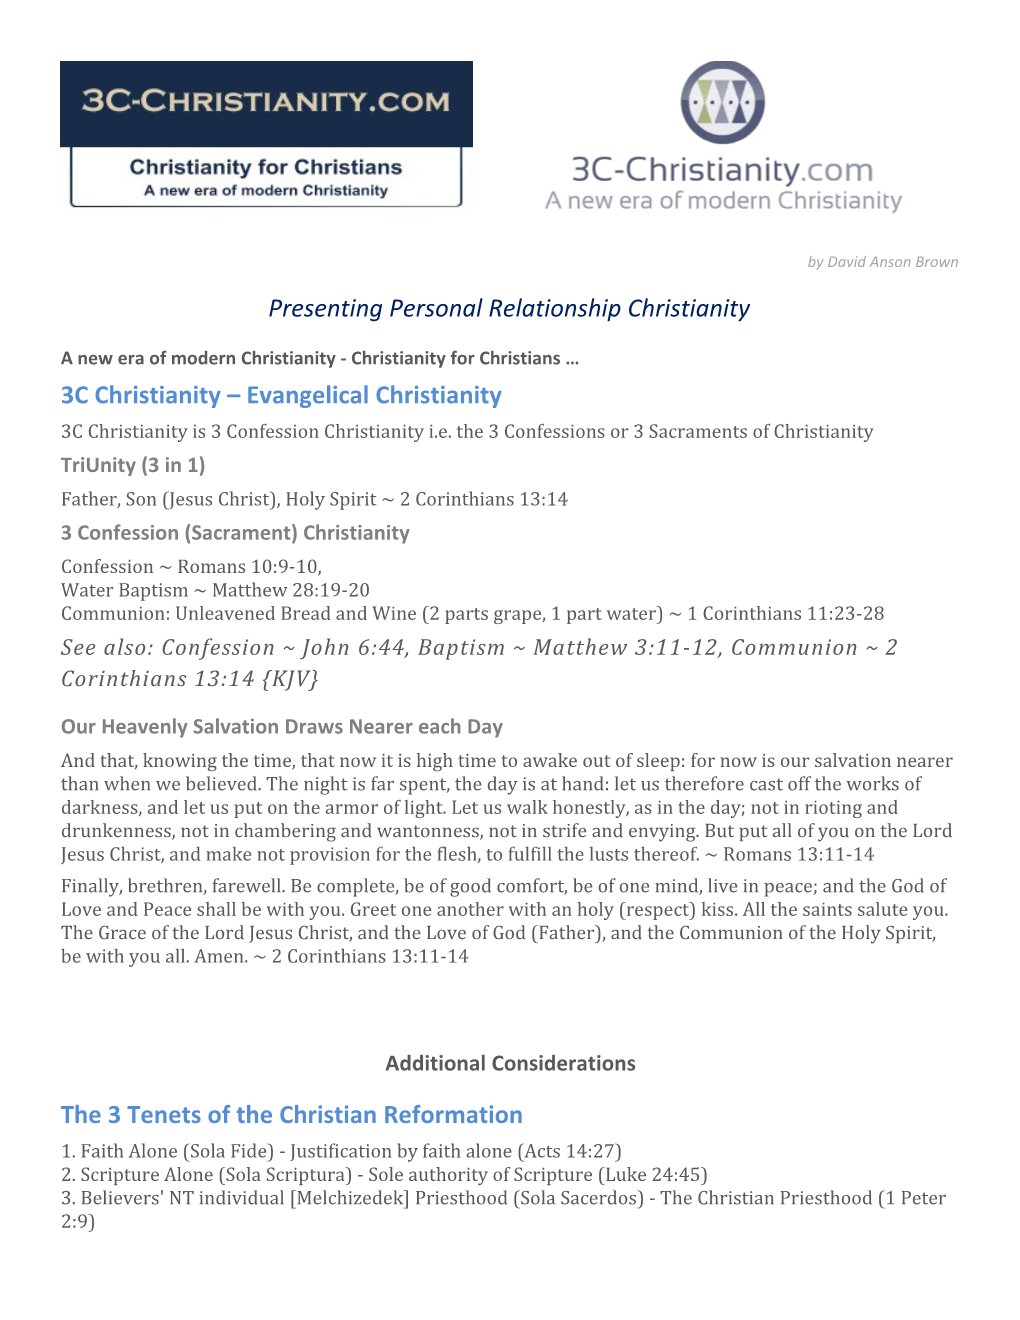 A New Era of Modern Christianity - Christianity for Christians